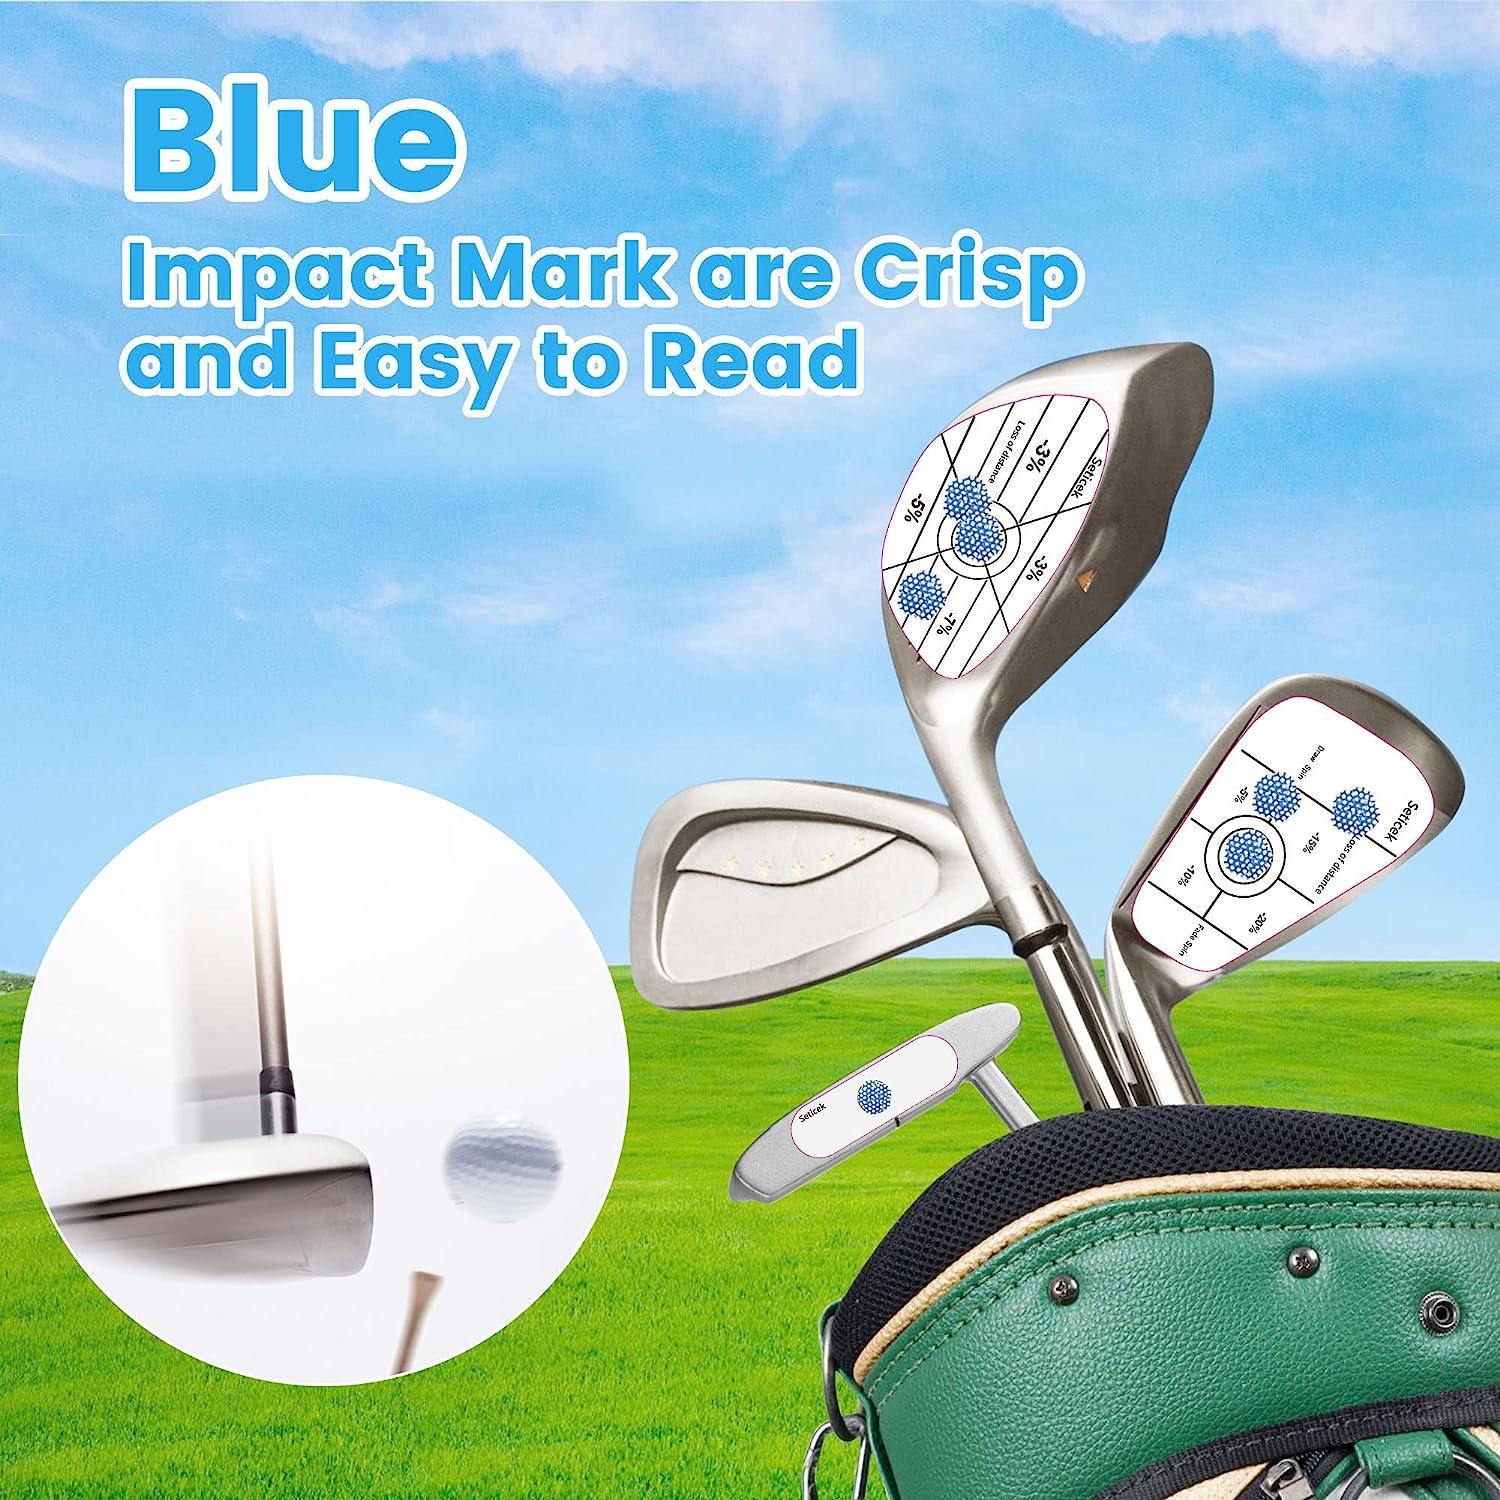  MSOAT Right Handed Golf Impact Tape Set, 120pcs  (80*Irons,30*Wood,10*Putters) Self-Teaching Sweet Spot and Consistency  Analysis, Golf Club Impact Stickers Hitting Recorder Swing Training Aid :  Sports & Outdoors